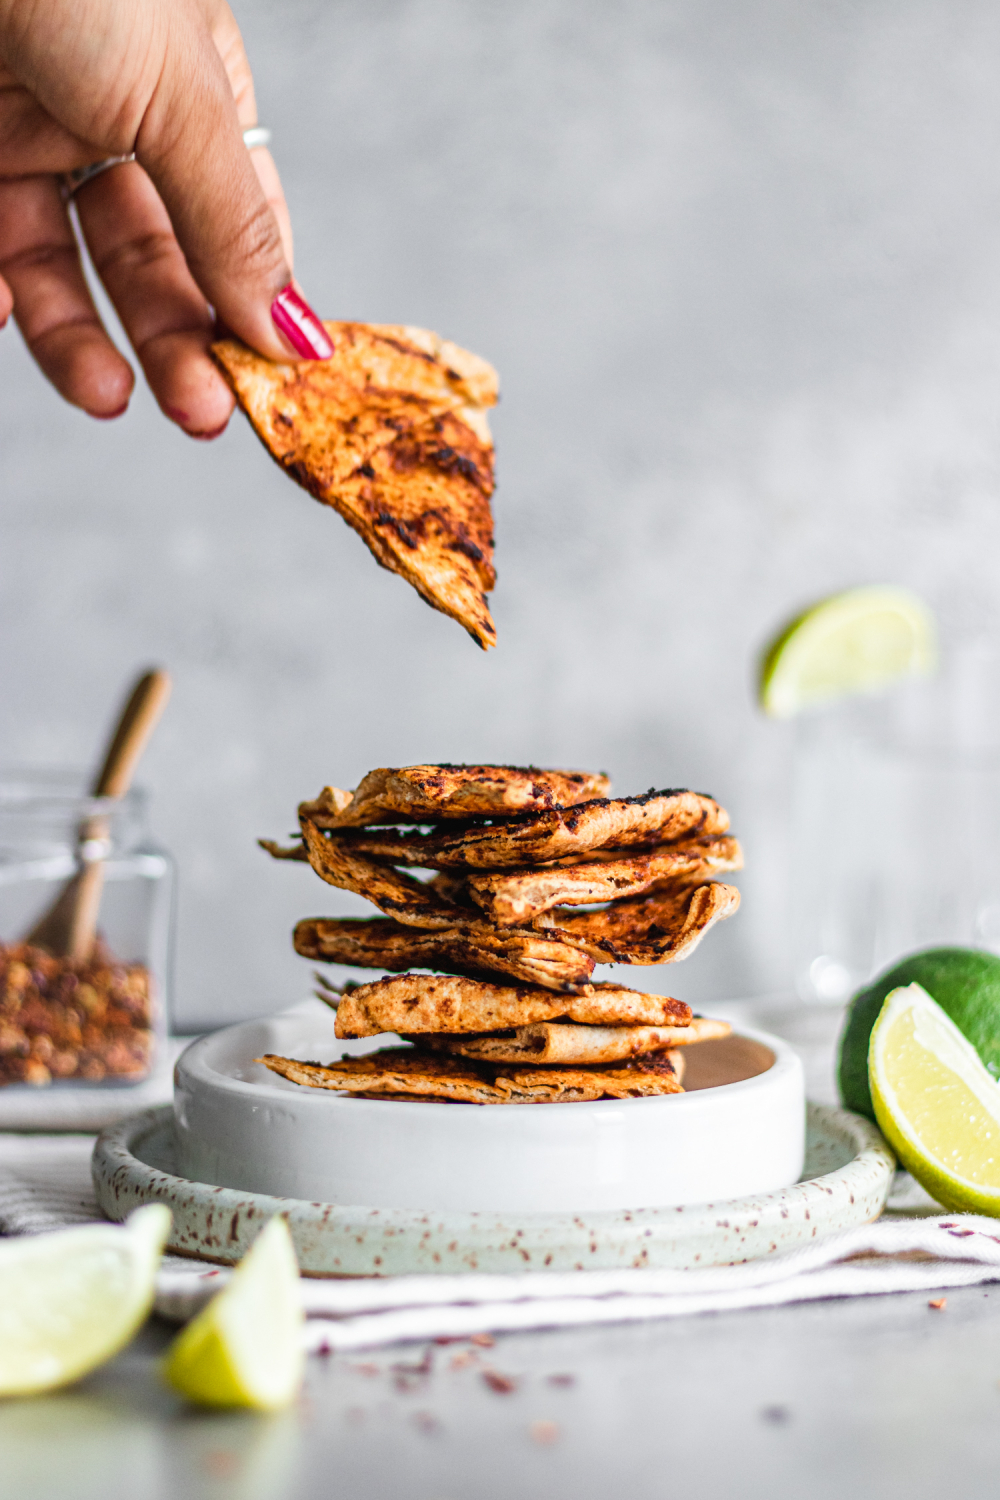 Stack of Whole Wheat Chili and Lime Pita Chips on a plate with hand reaching for one